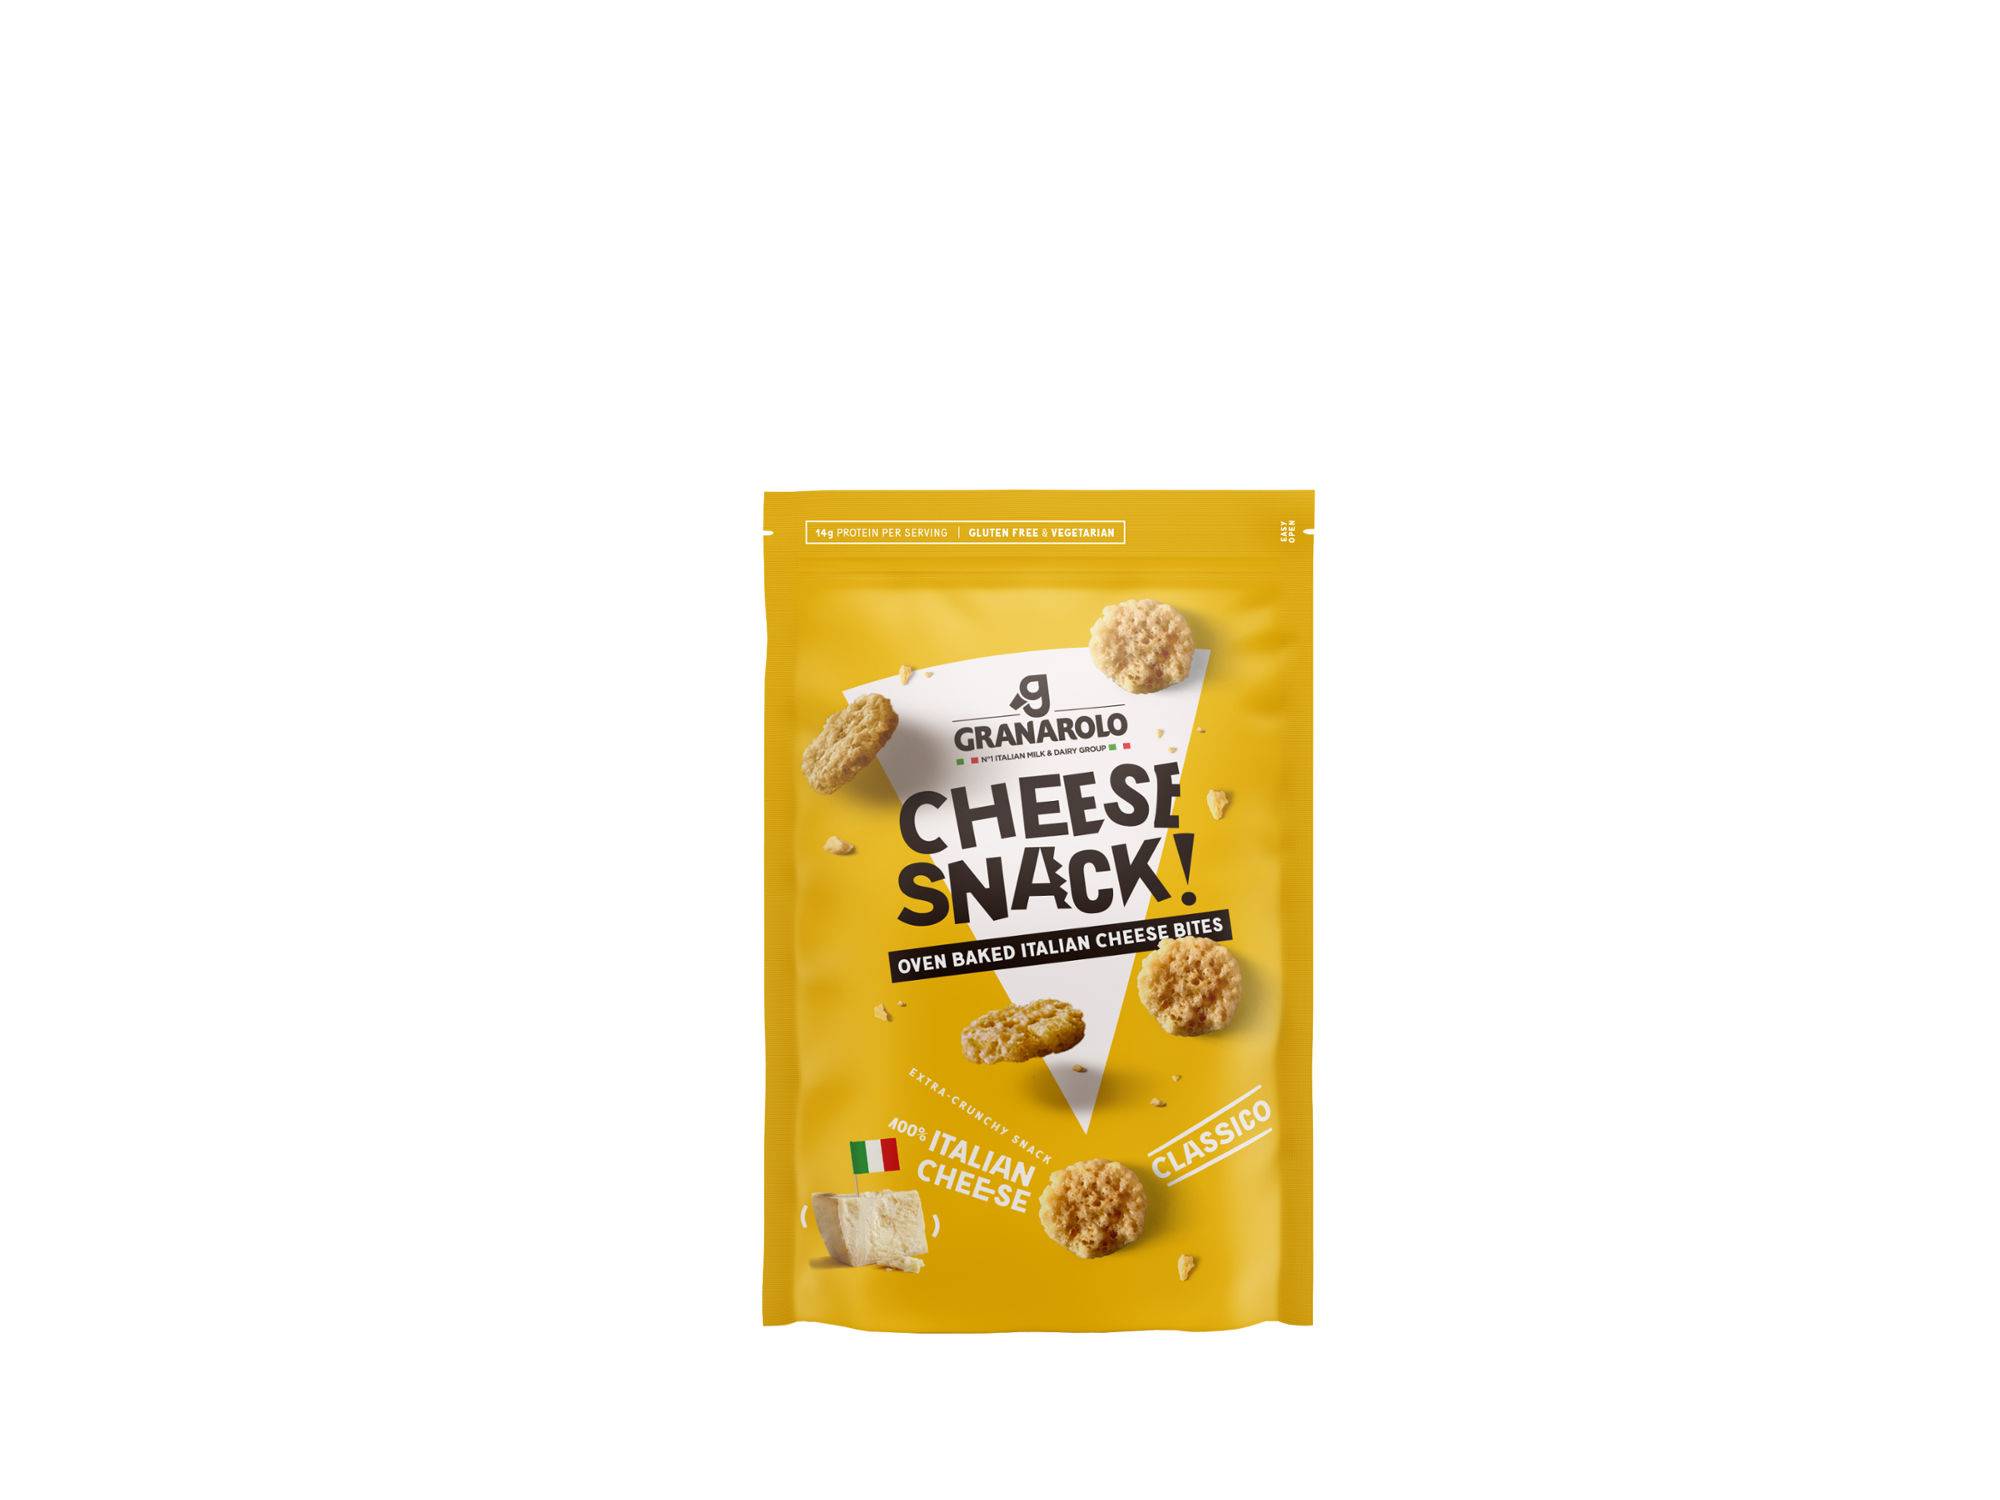 CHEESE SNACK